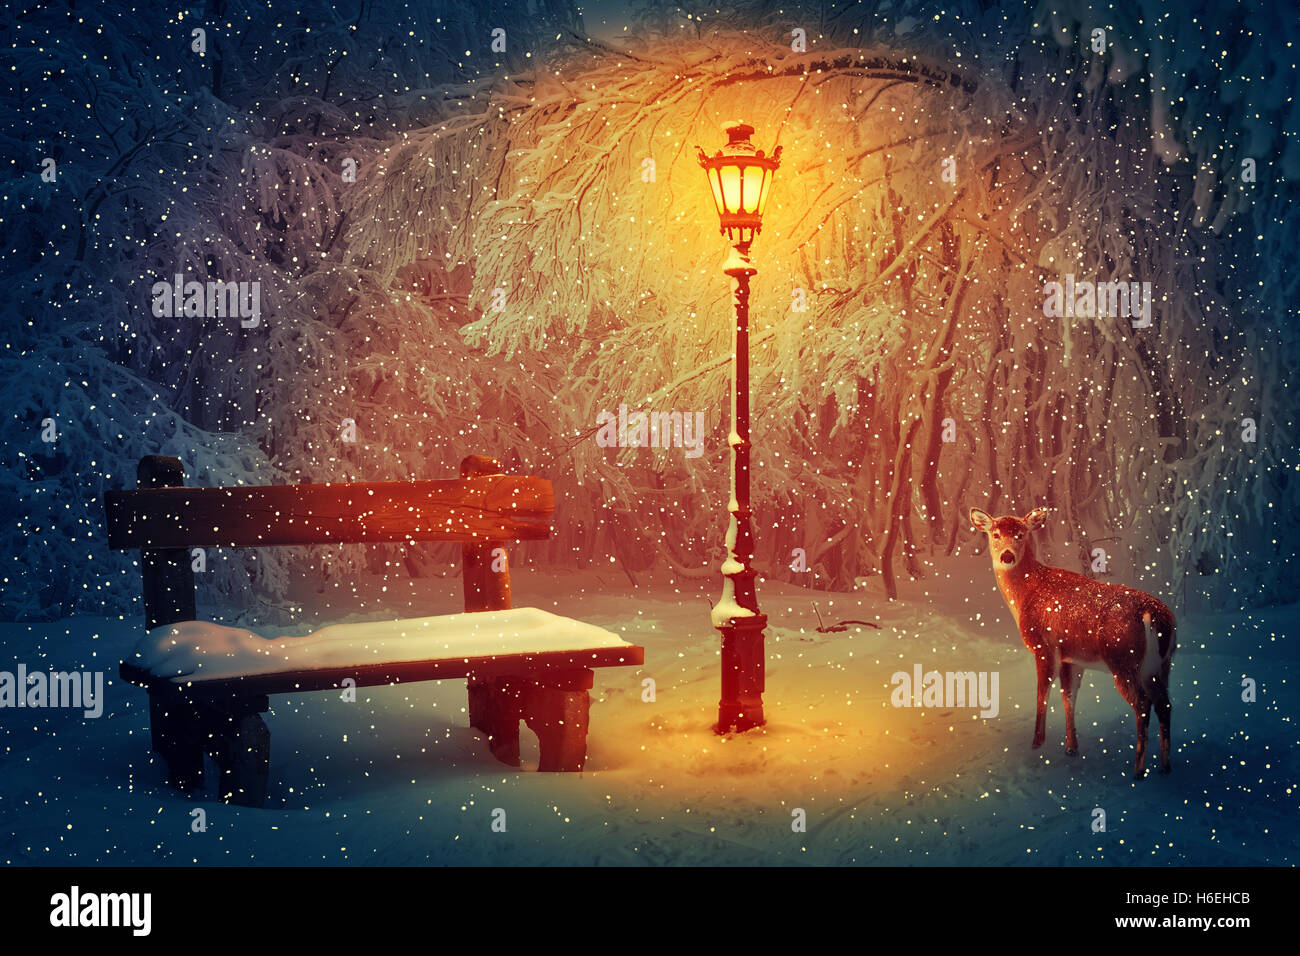 Wooden bench and a glowing lamp in the winter park covered in with snow. Snowing peaceful night scene and a doe looking carefull Stock Photo